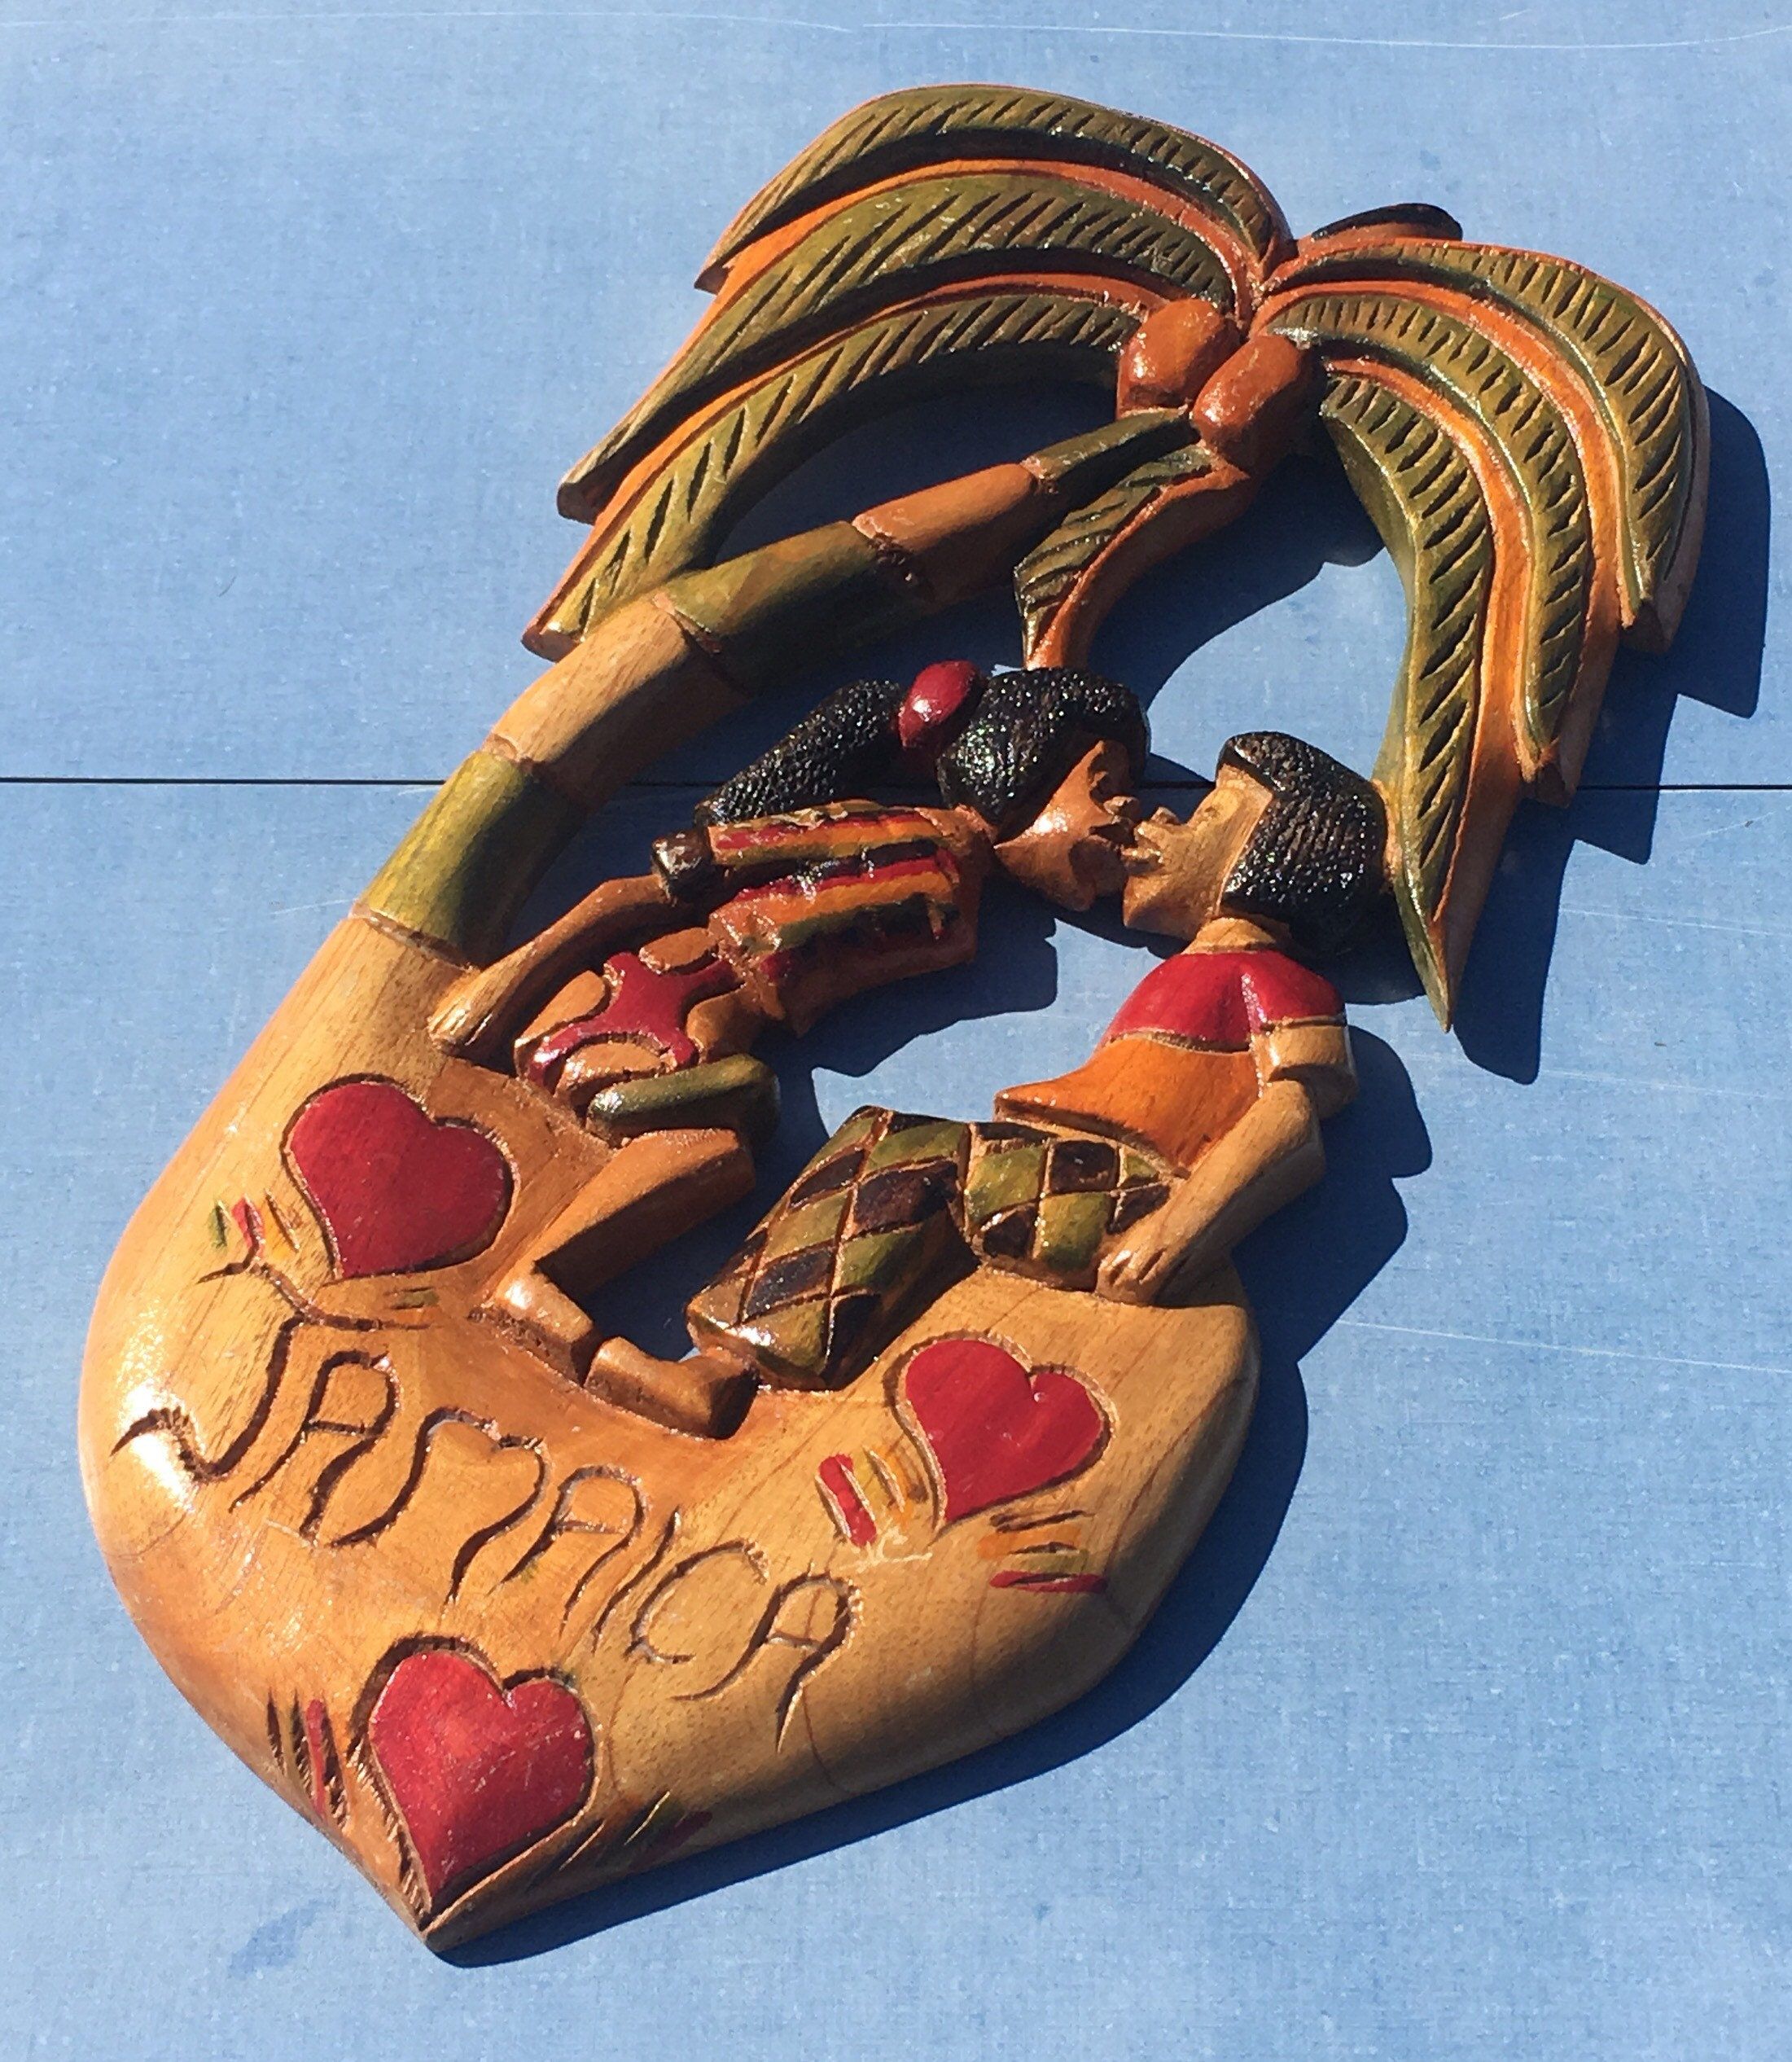 Vintage Wood Carving, Tropical Lovers Wall Decor, Carved For Most Up To Date Retro Wood Wall Art (View 13 of 20)